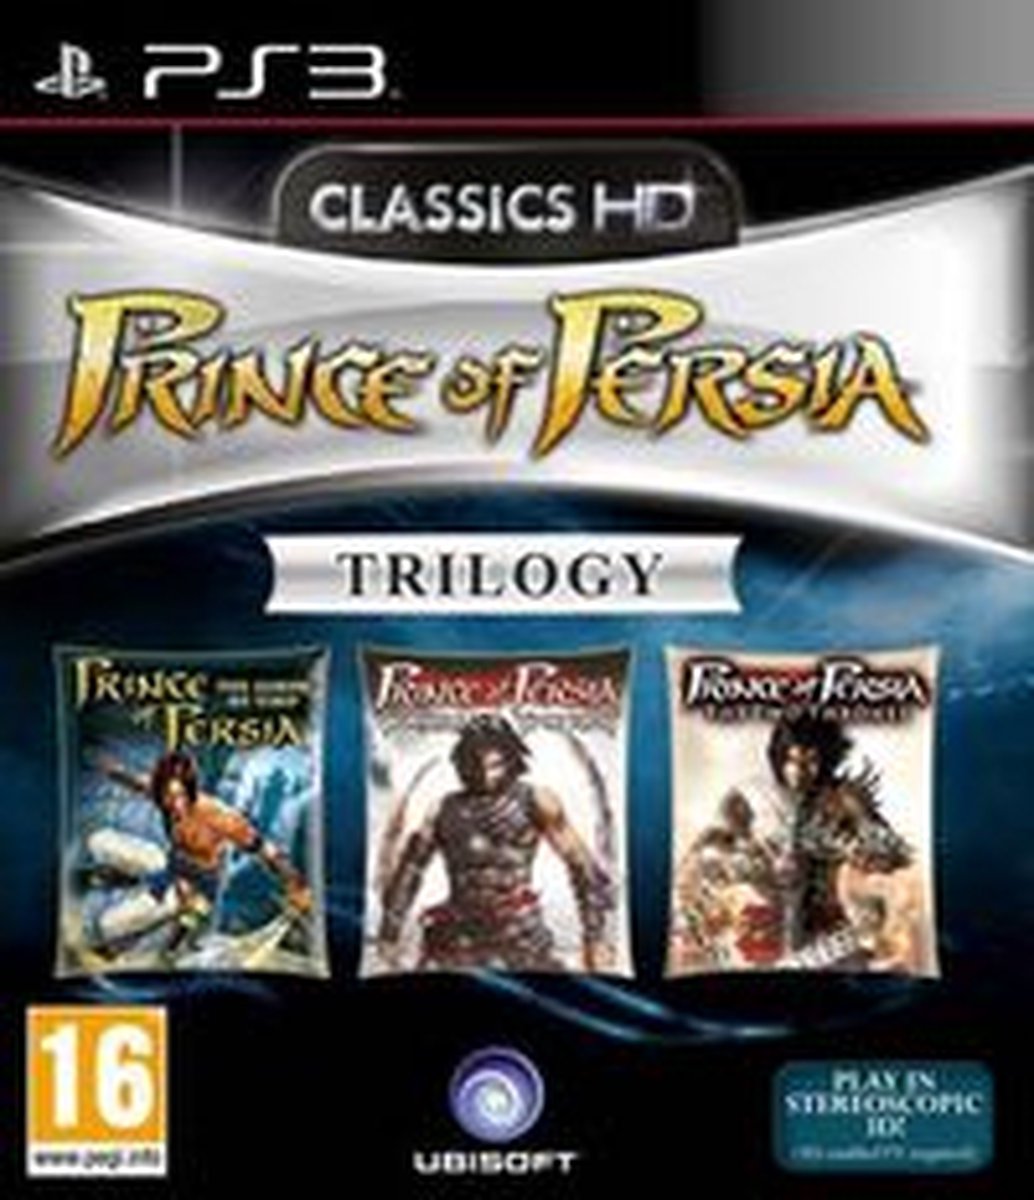 Prince of Persia - HD Trilogy Eition, Games